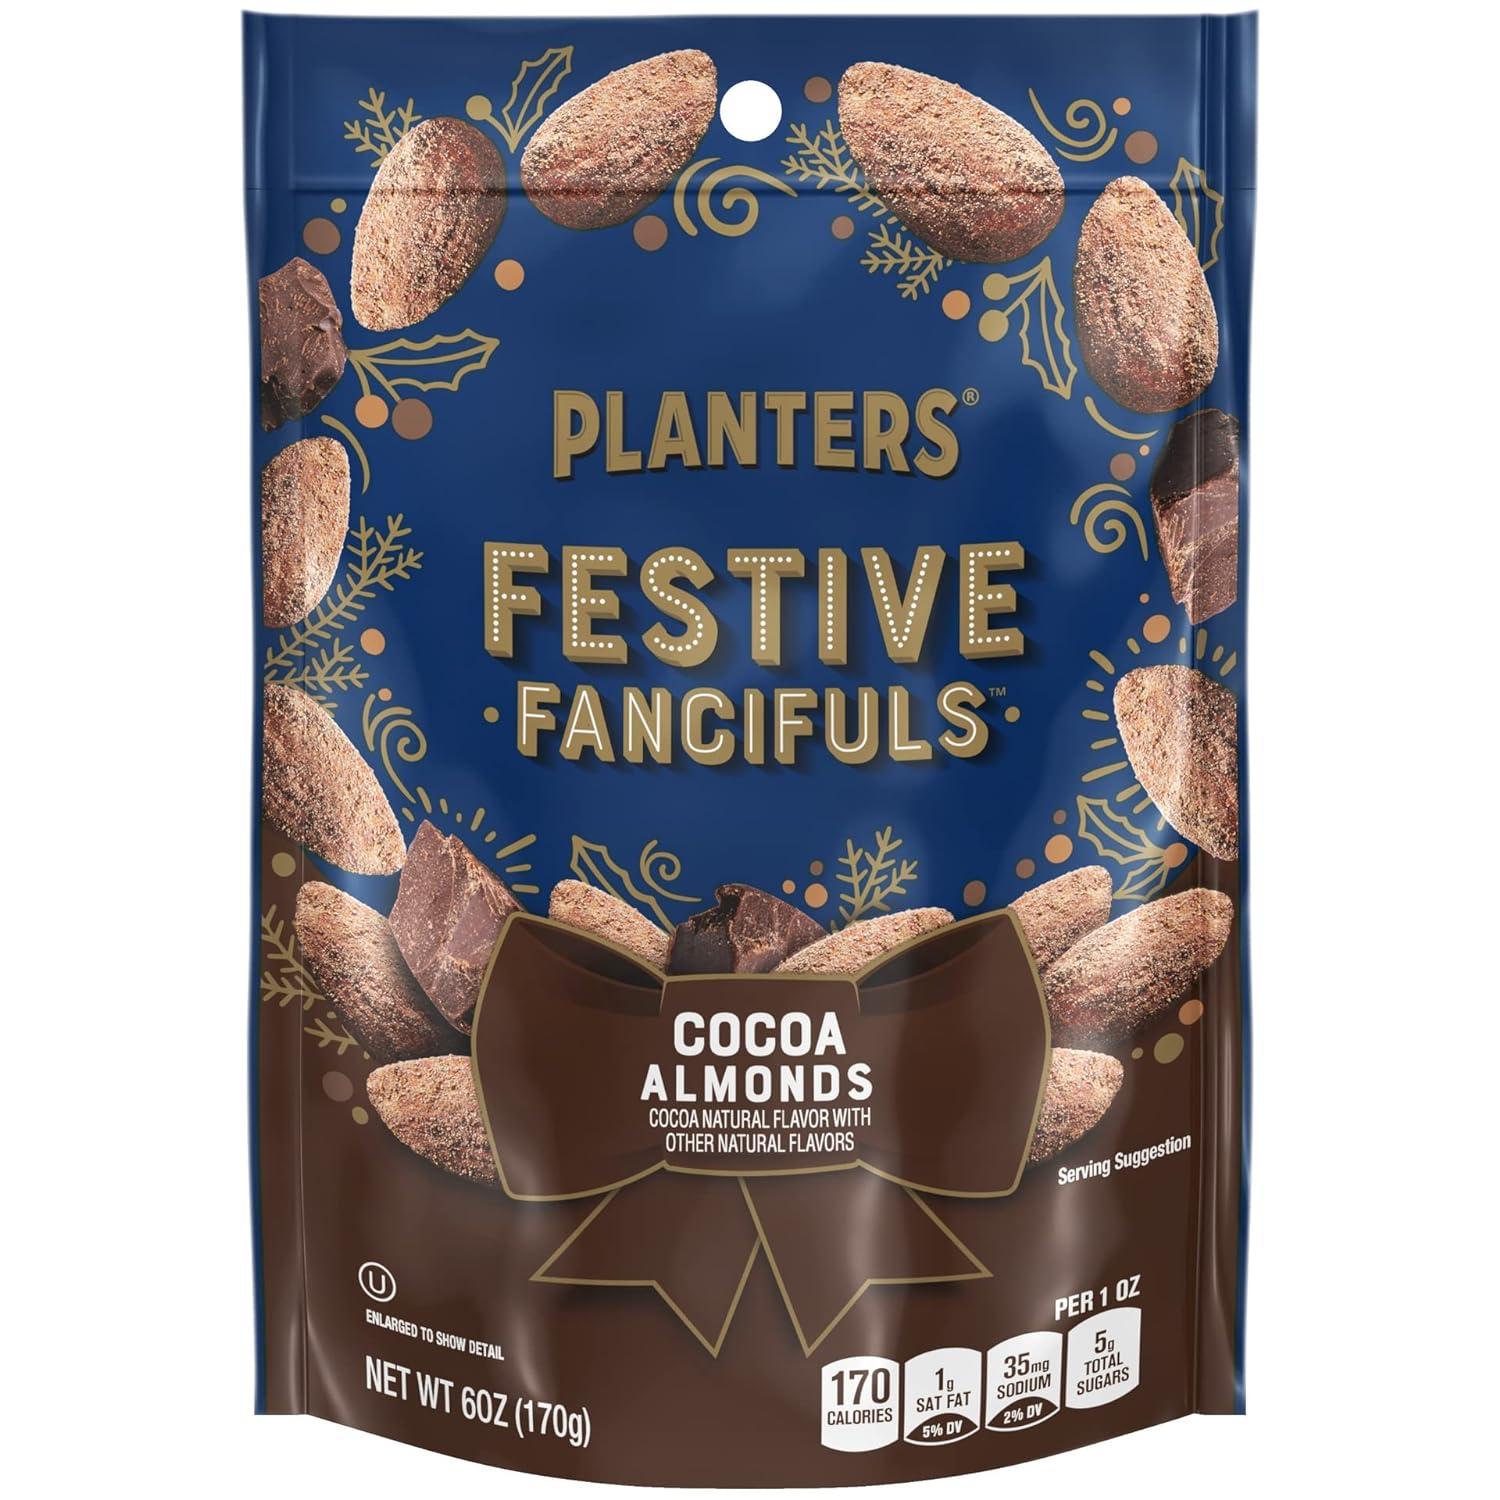 Planters Dark Chocolate Flavored Roasted Cocoa Almonds for $3.74